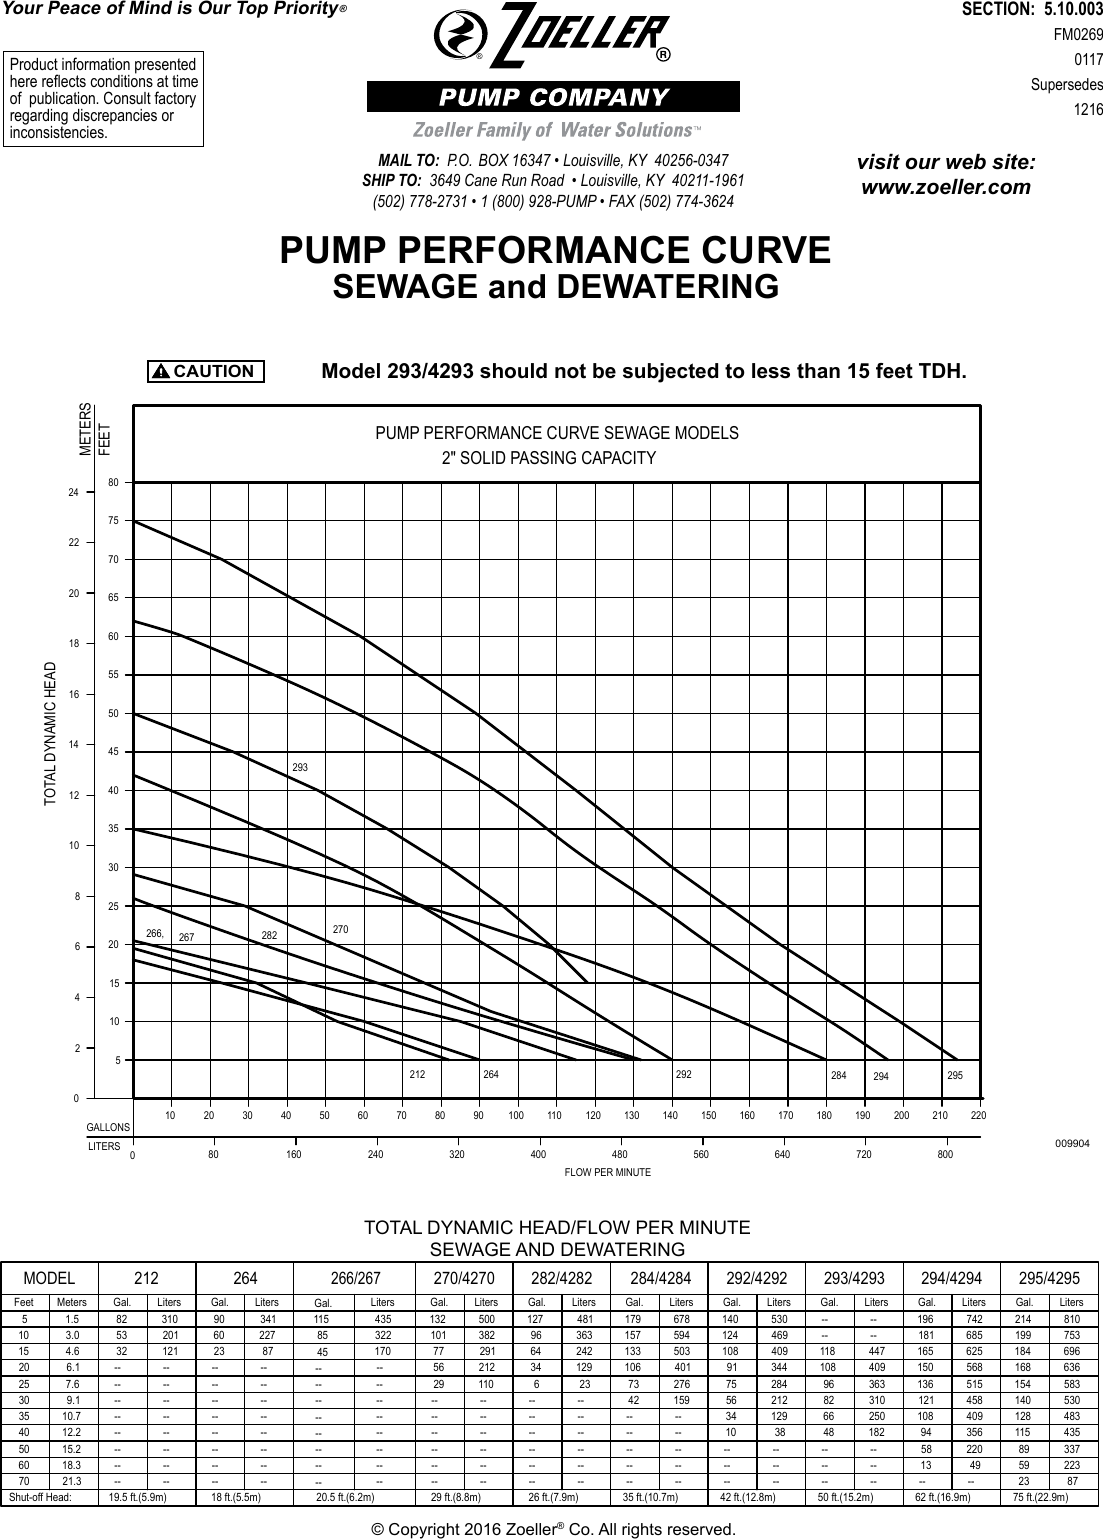 Page 1 of 4 - 212 6 Zoeller 57 Performance Curve User Manual